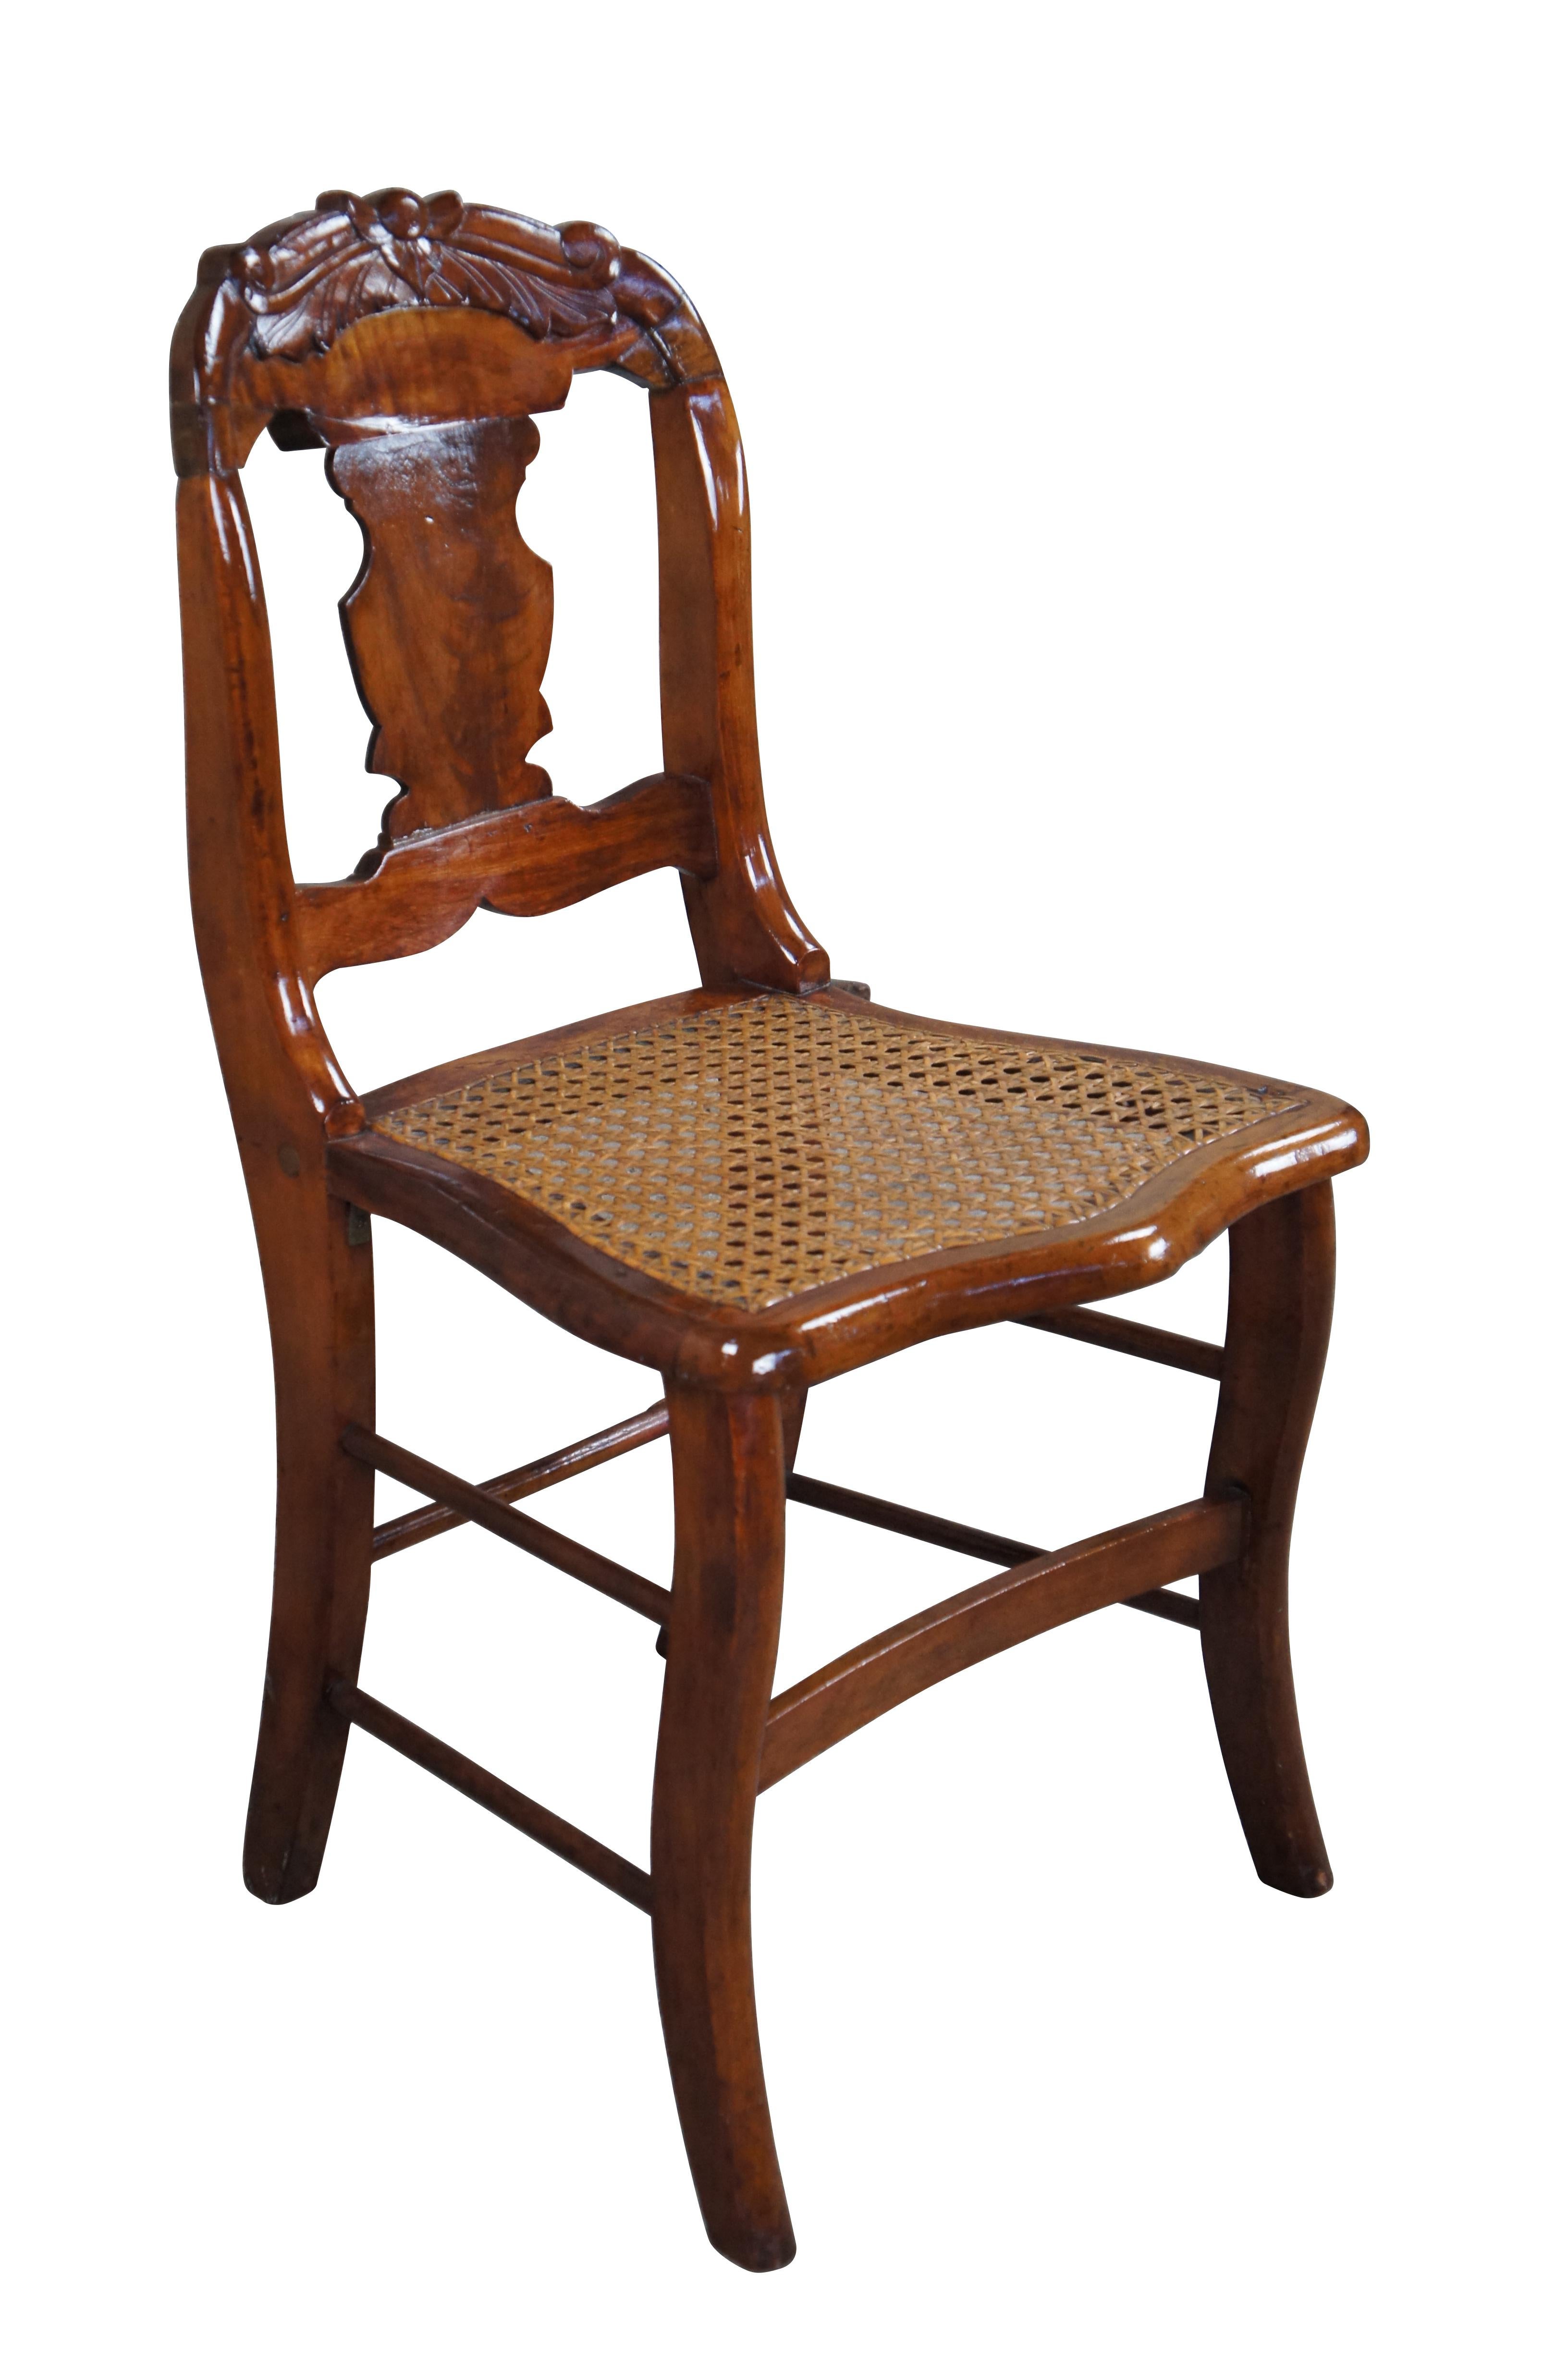 Antique Victorian 19th Century dining side or desk chair.  Made of walnut featuring slat back with carved accents and caned seat.

Dimensions:
17.5